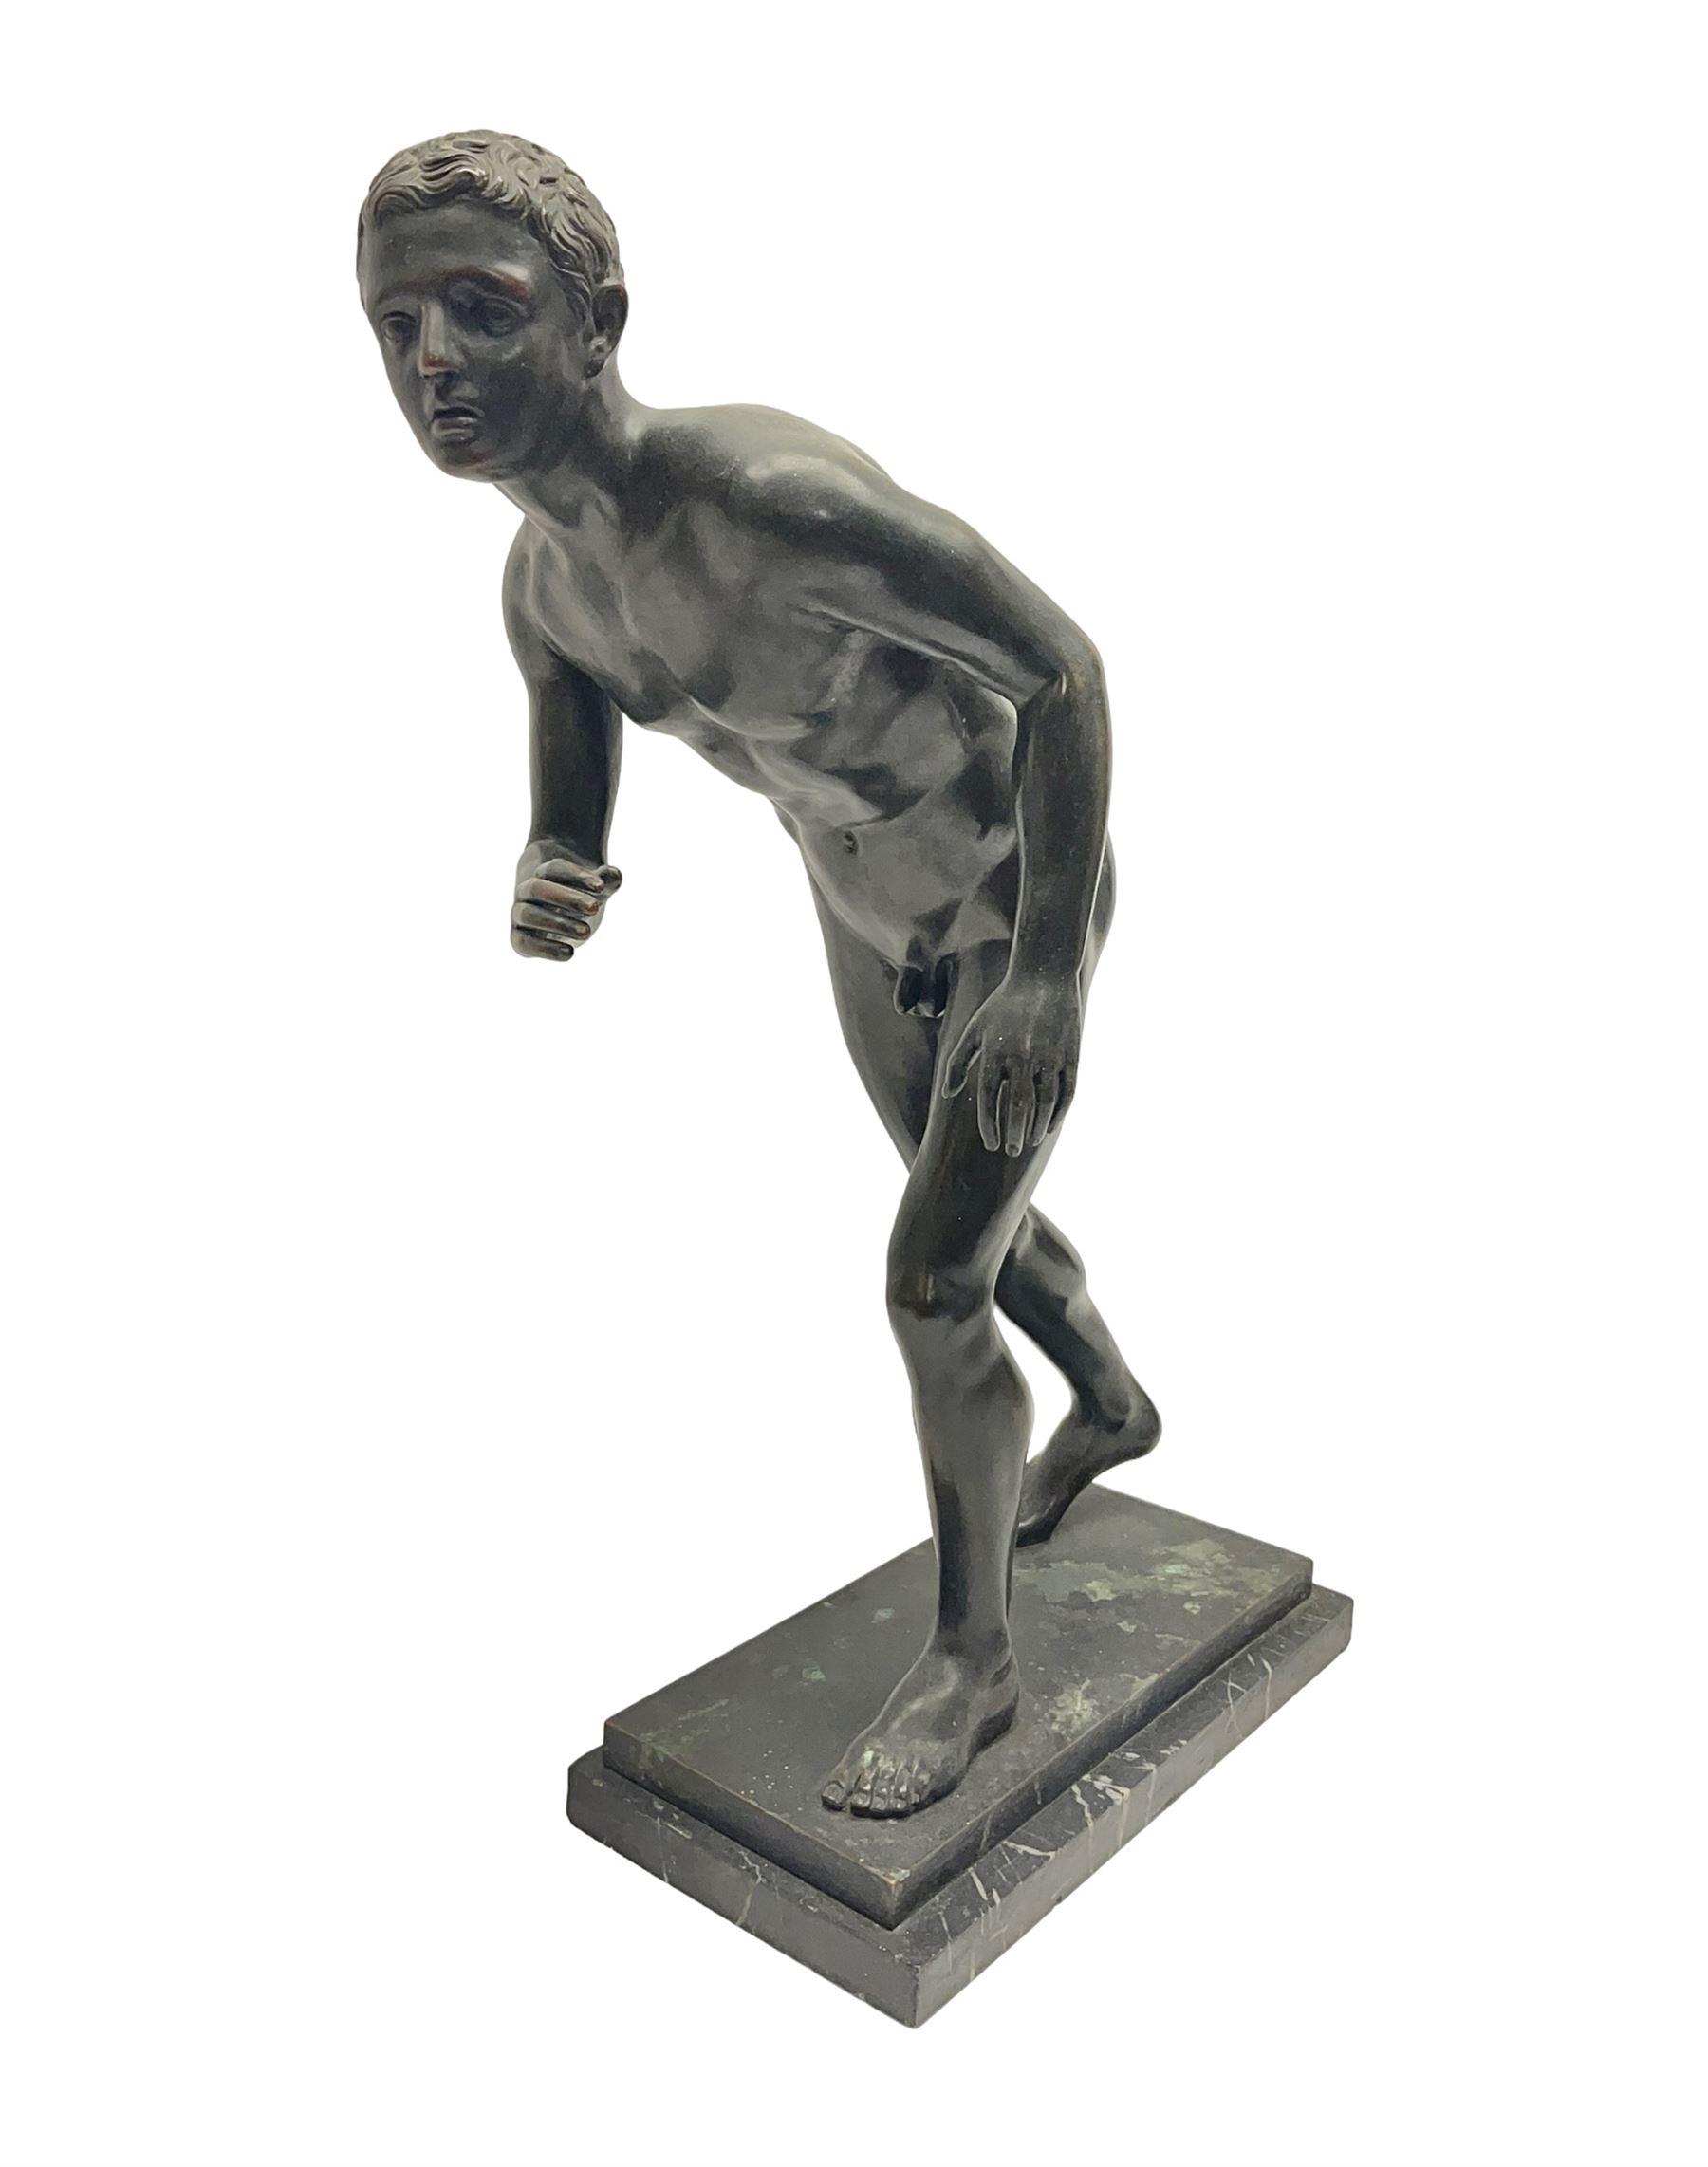 Bronzed figure of a nude male